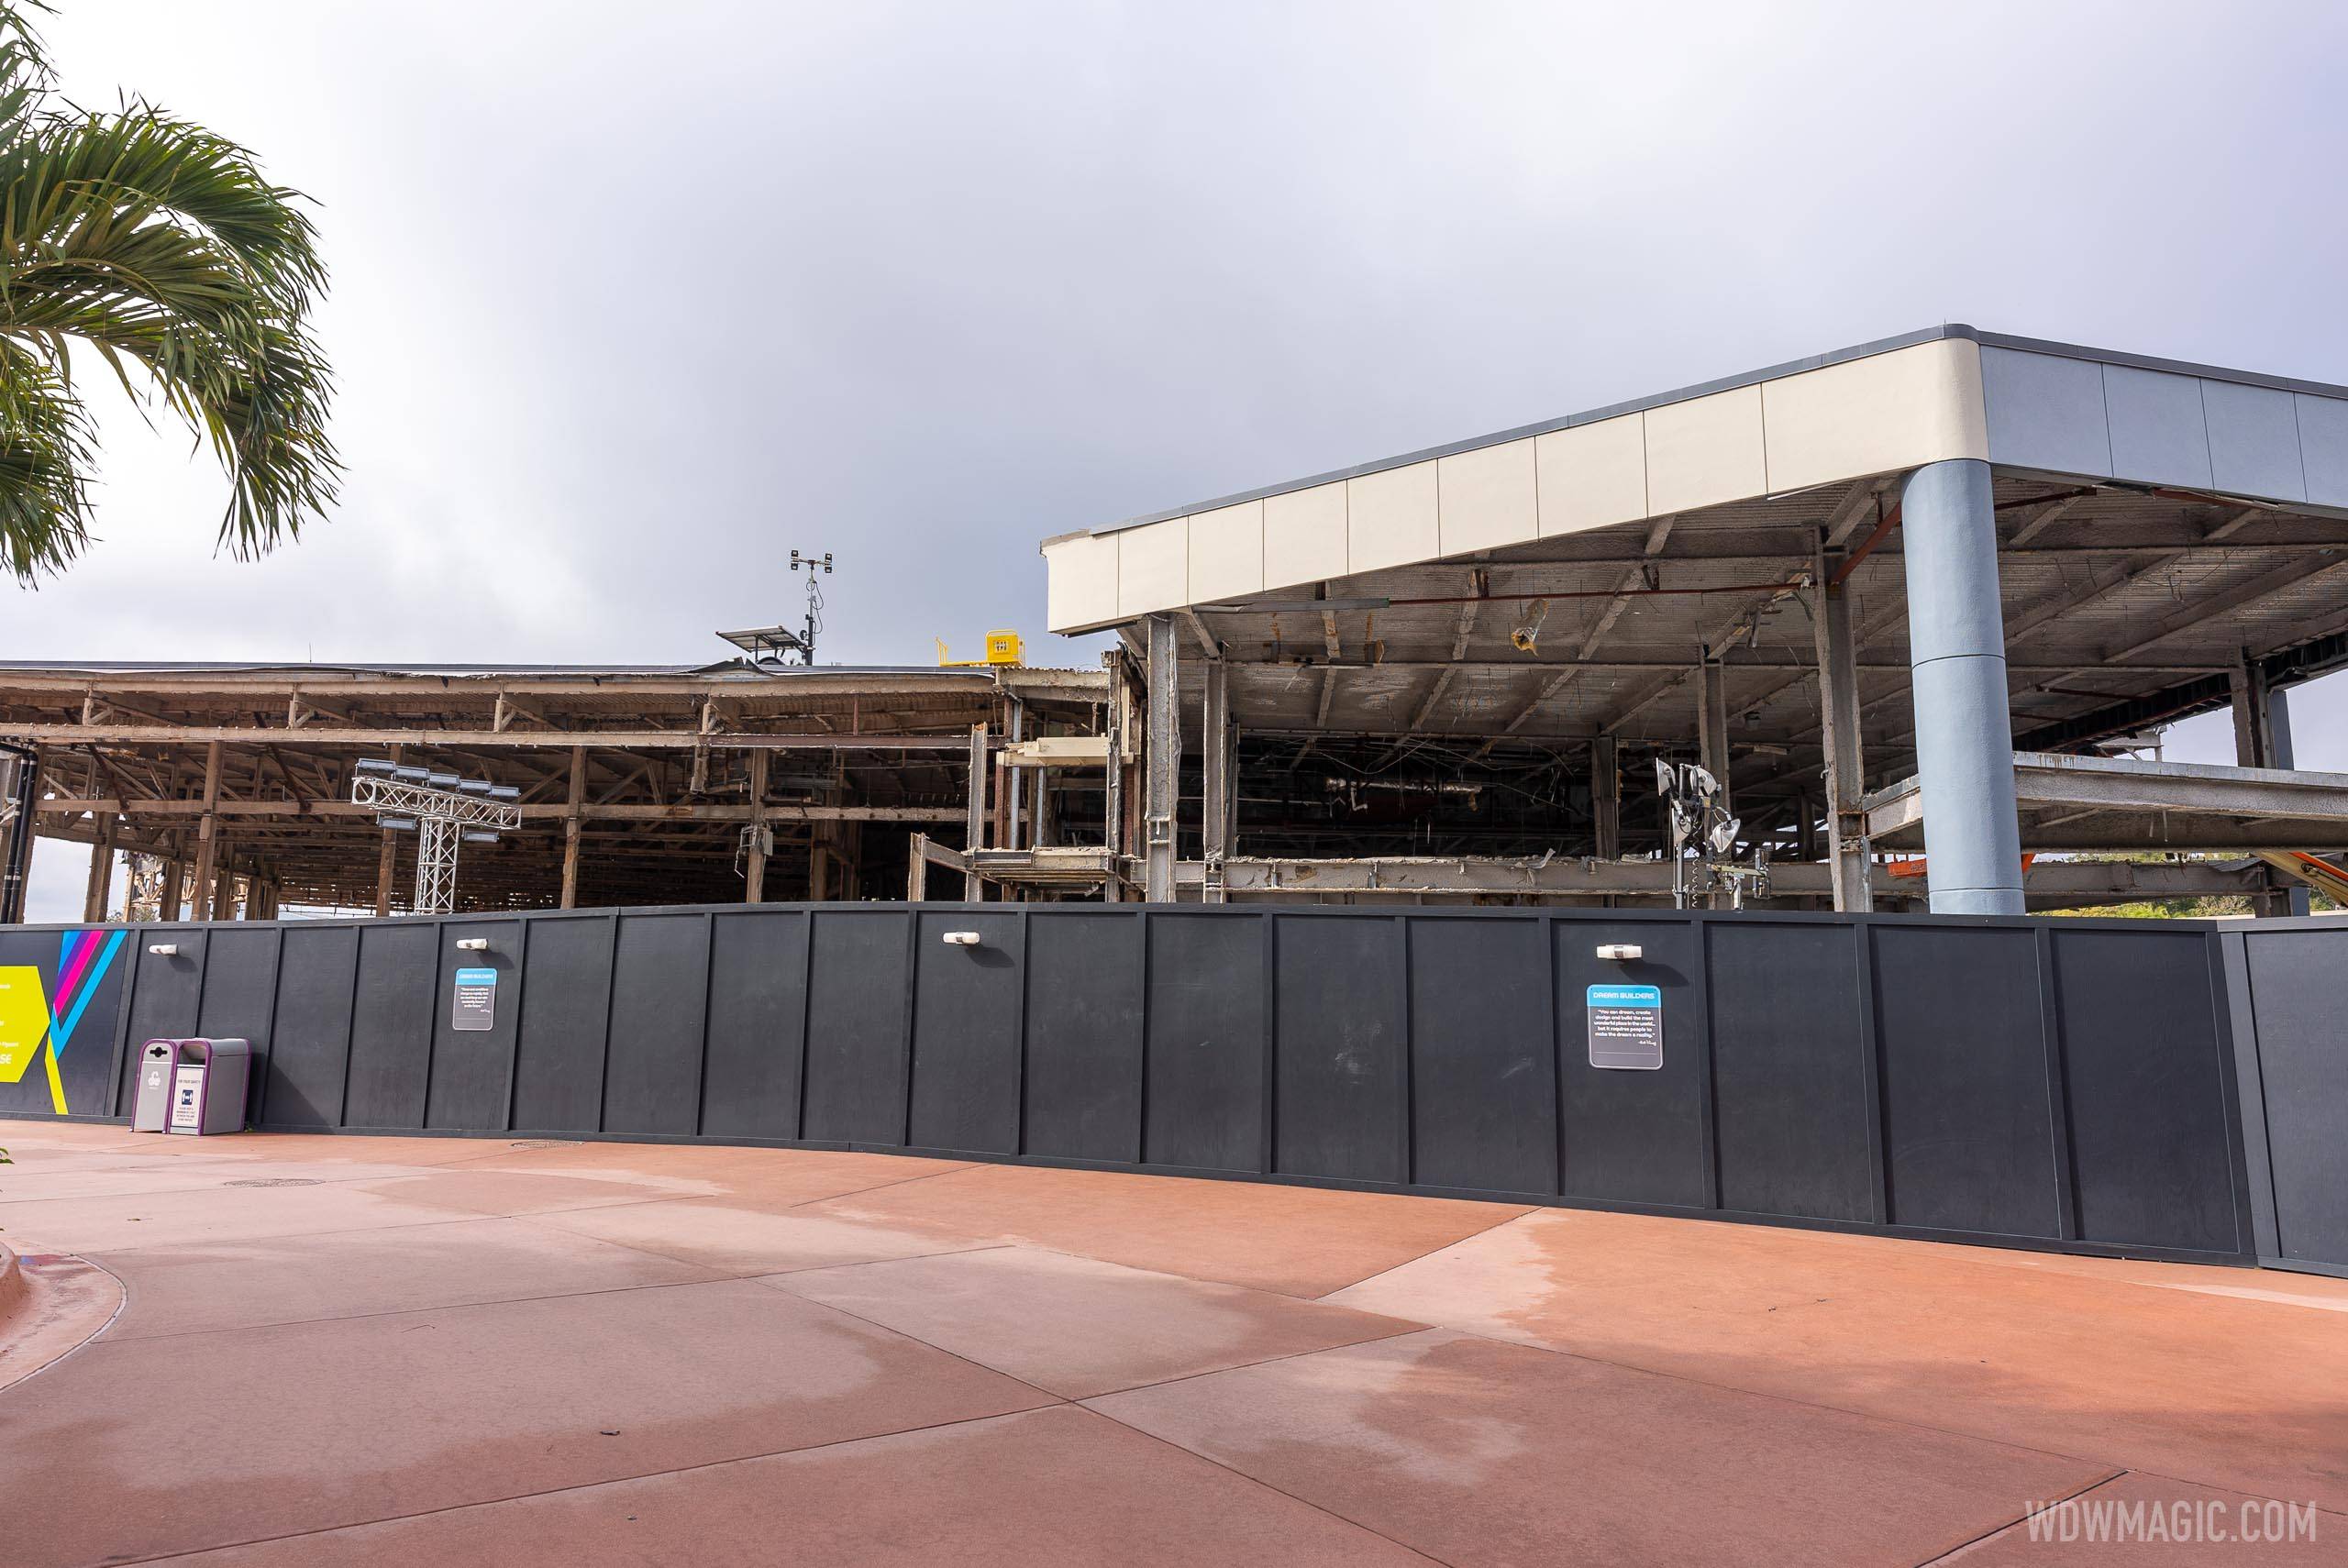 EPCOT Innoventions West demolition - January 26 2021